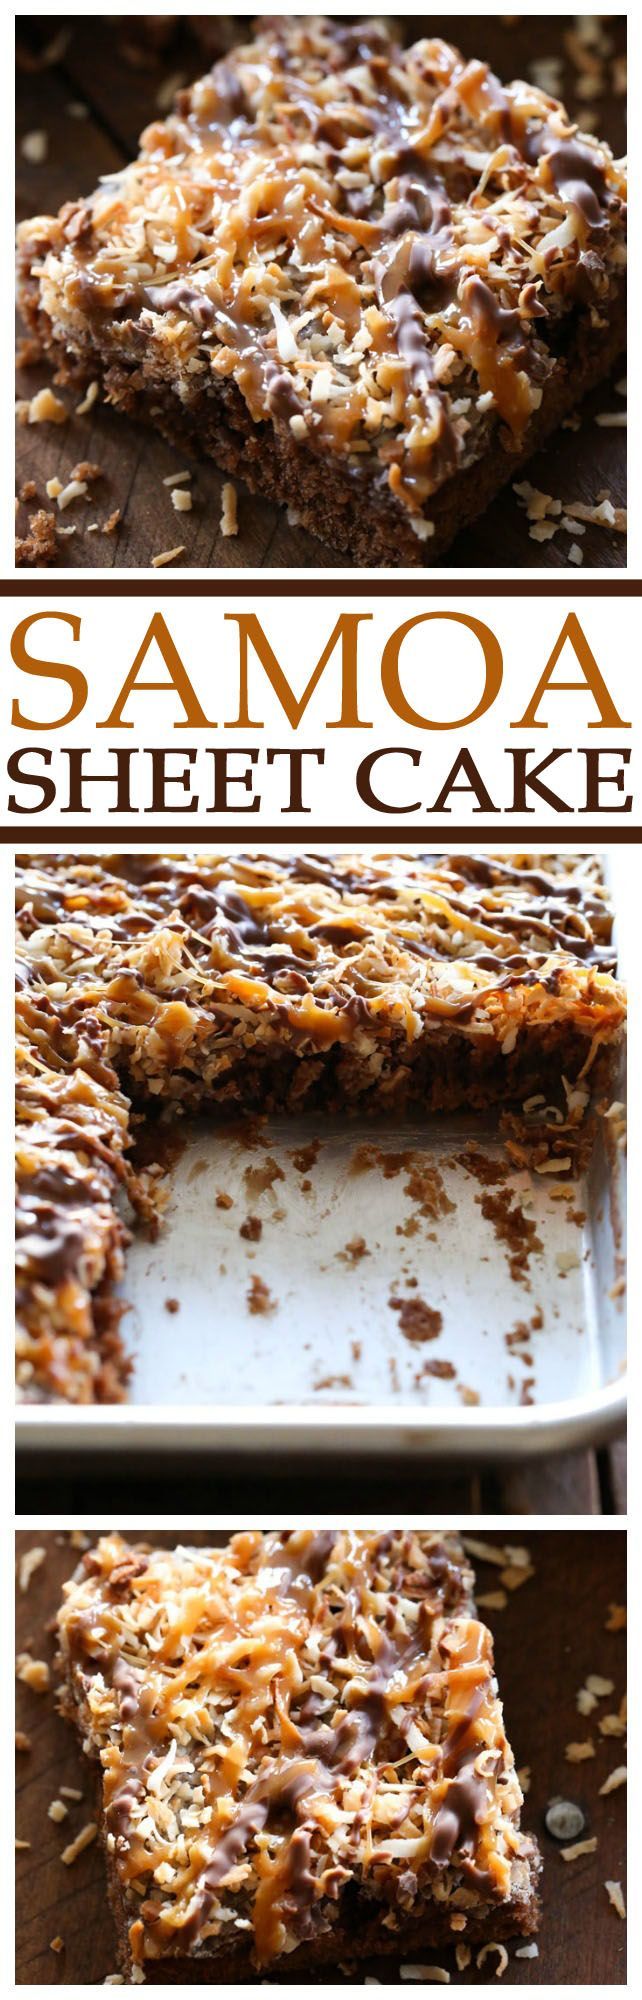 Samoa Sheet Cake… this has been deemed one of “Chef in Training”s Top 5 favorite recipes on her blog! It is one of the best